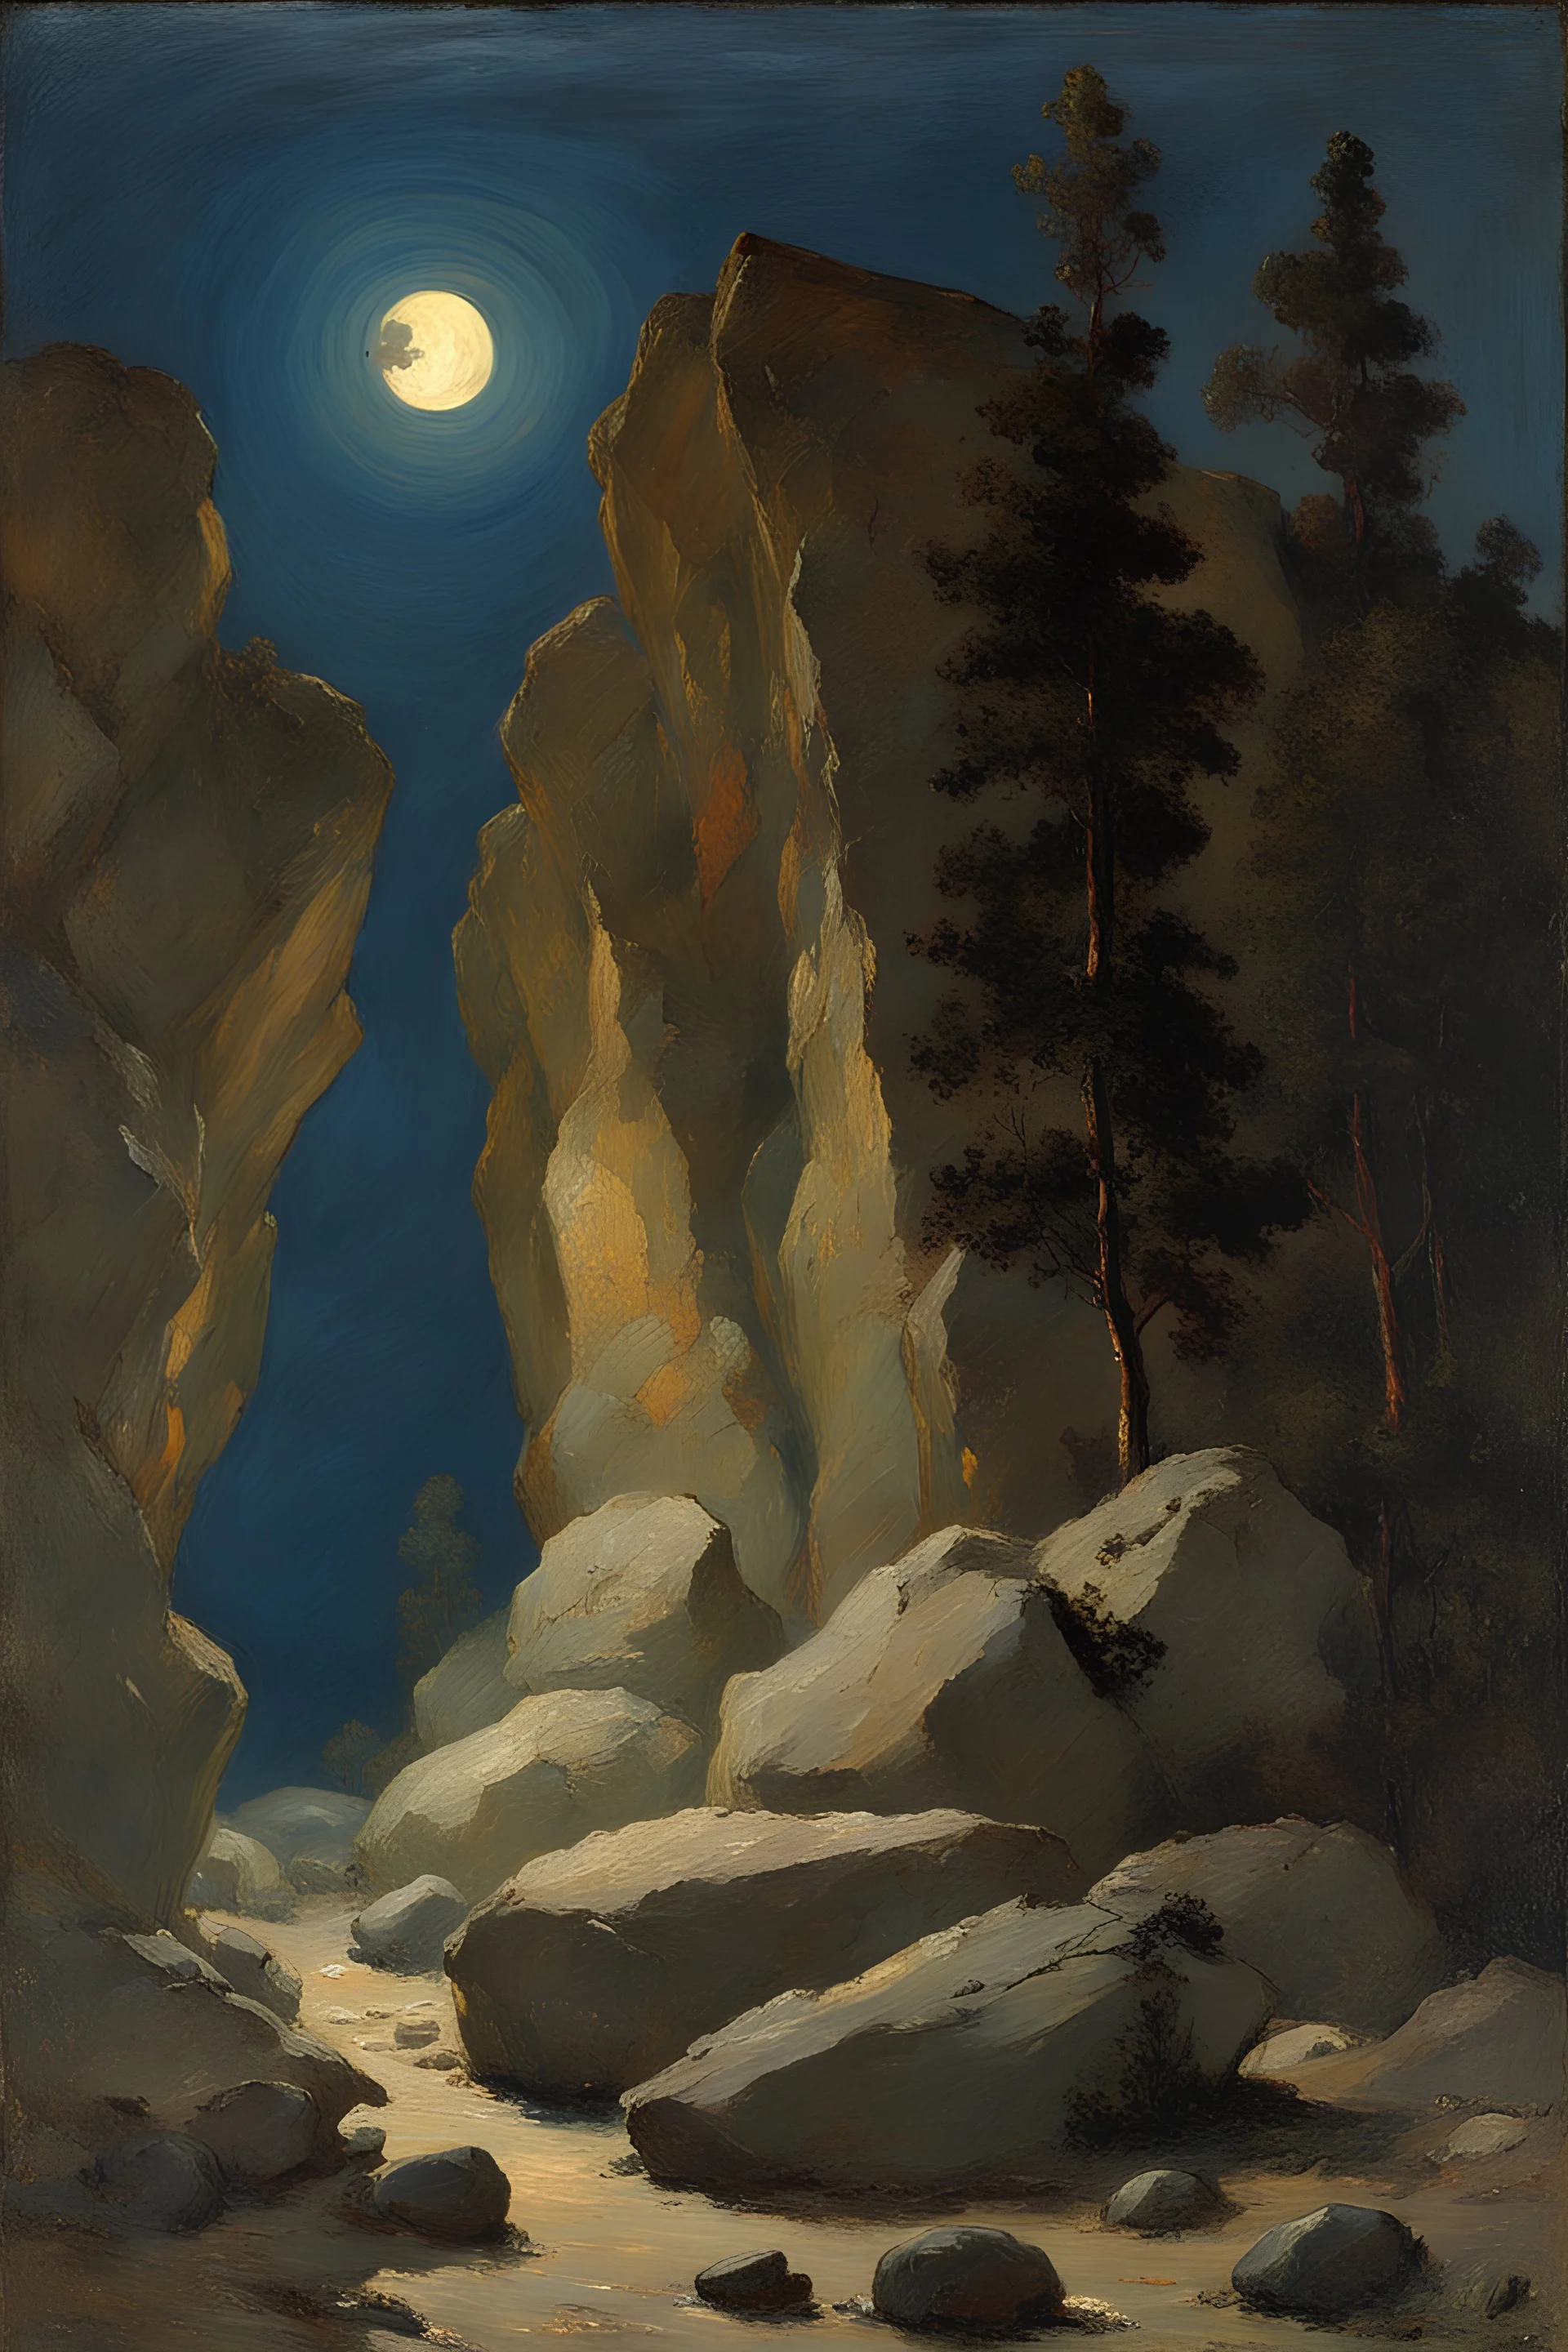 Night, rocks, trees, henry luyten and auguste oleffe impressionism paintings